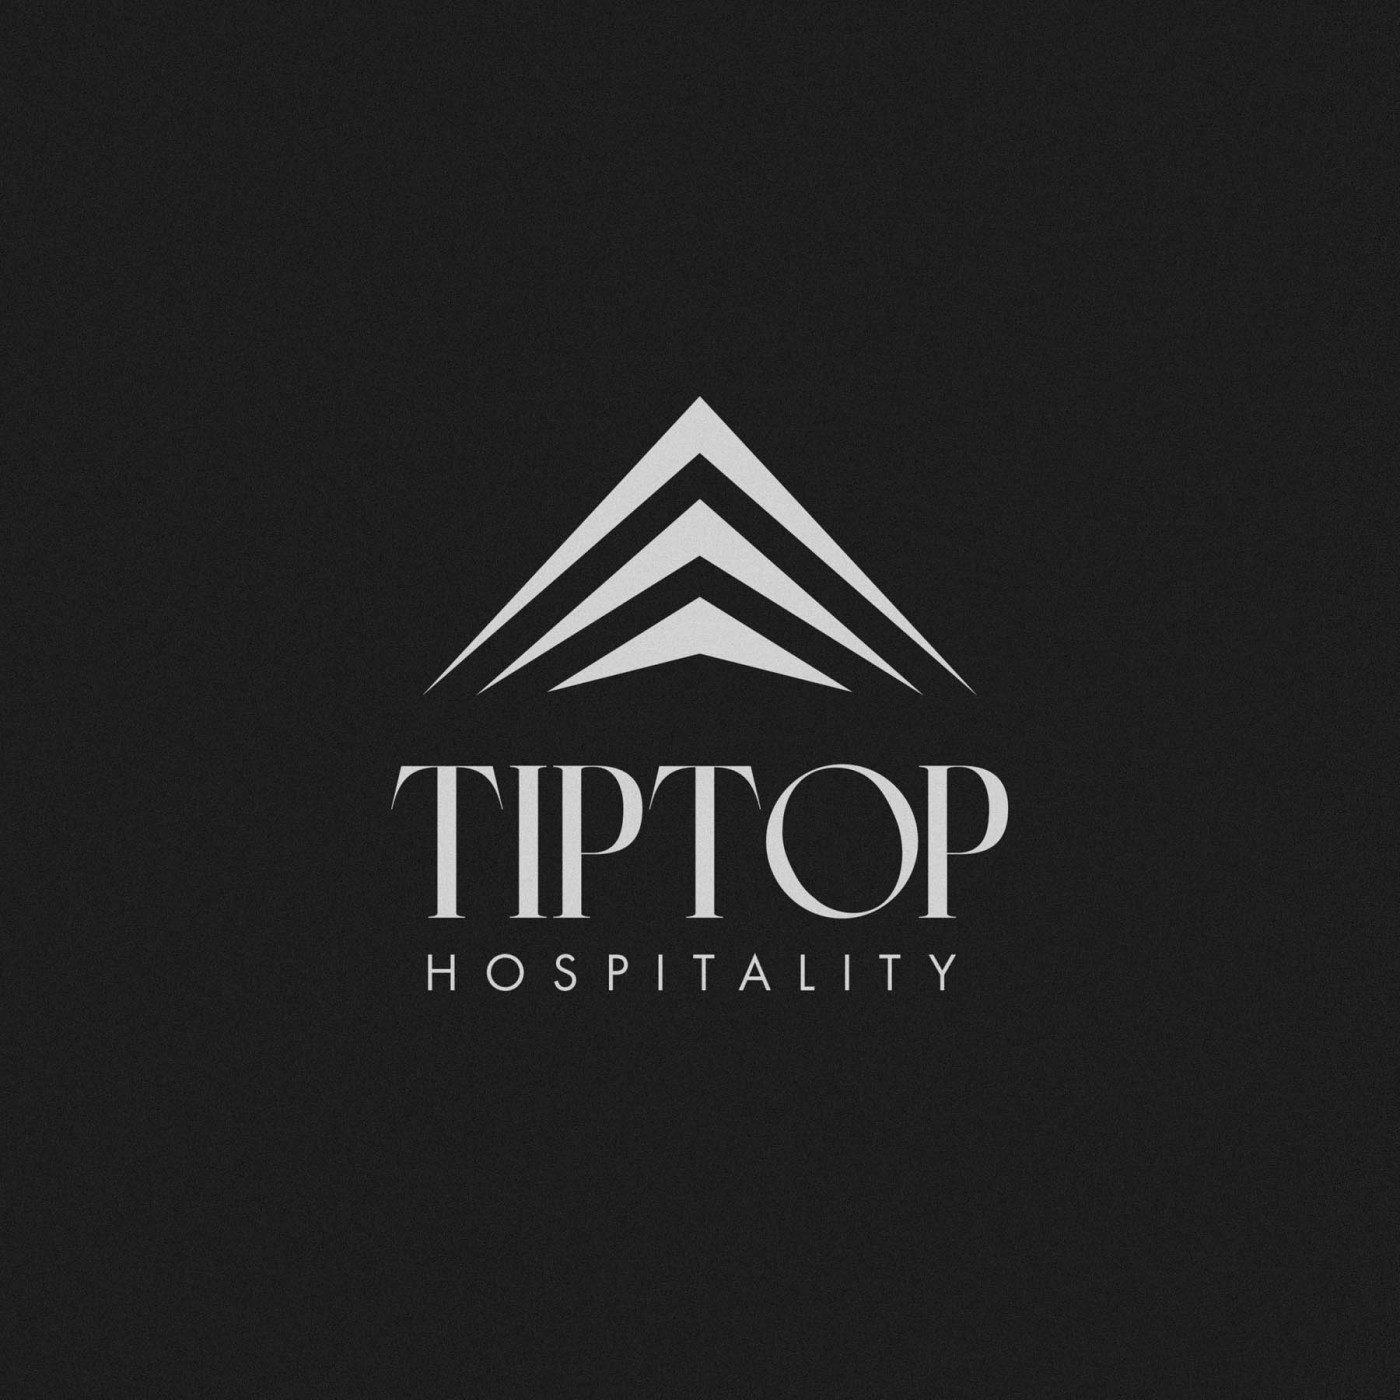 Tip Top Hospitality Brand Luxury Logo High End Events10